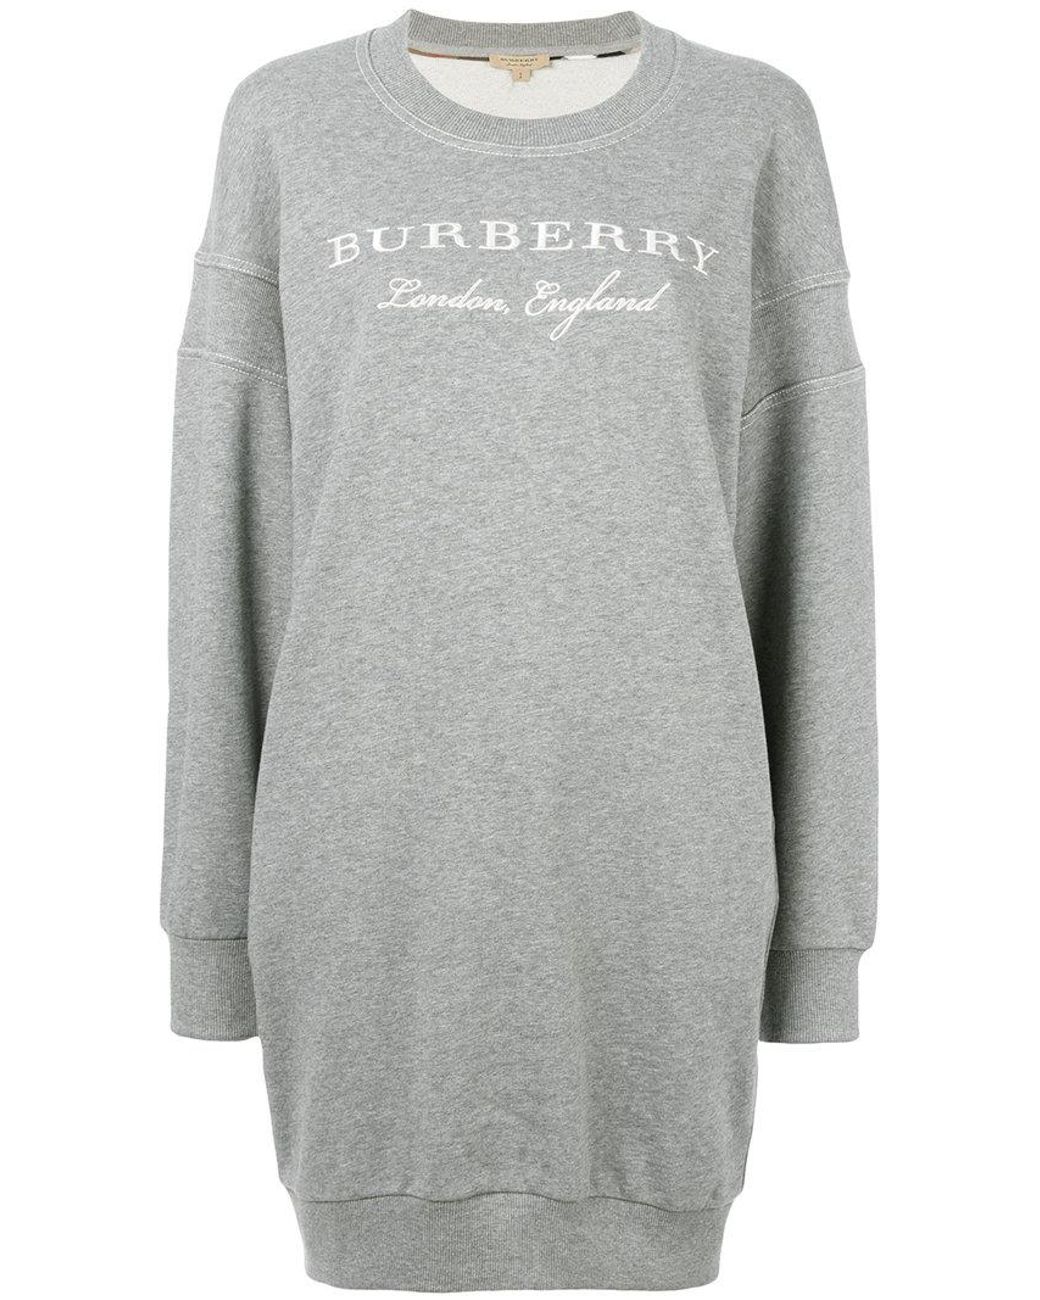 Burberry Embroidered Motif Cotton Jersey Sweatshirt Dress in Gray | Lyst